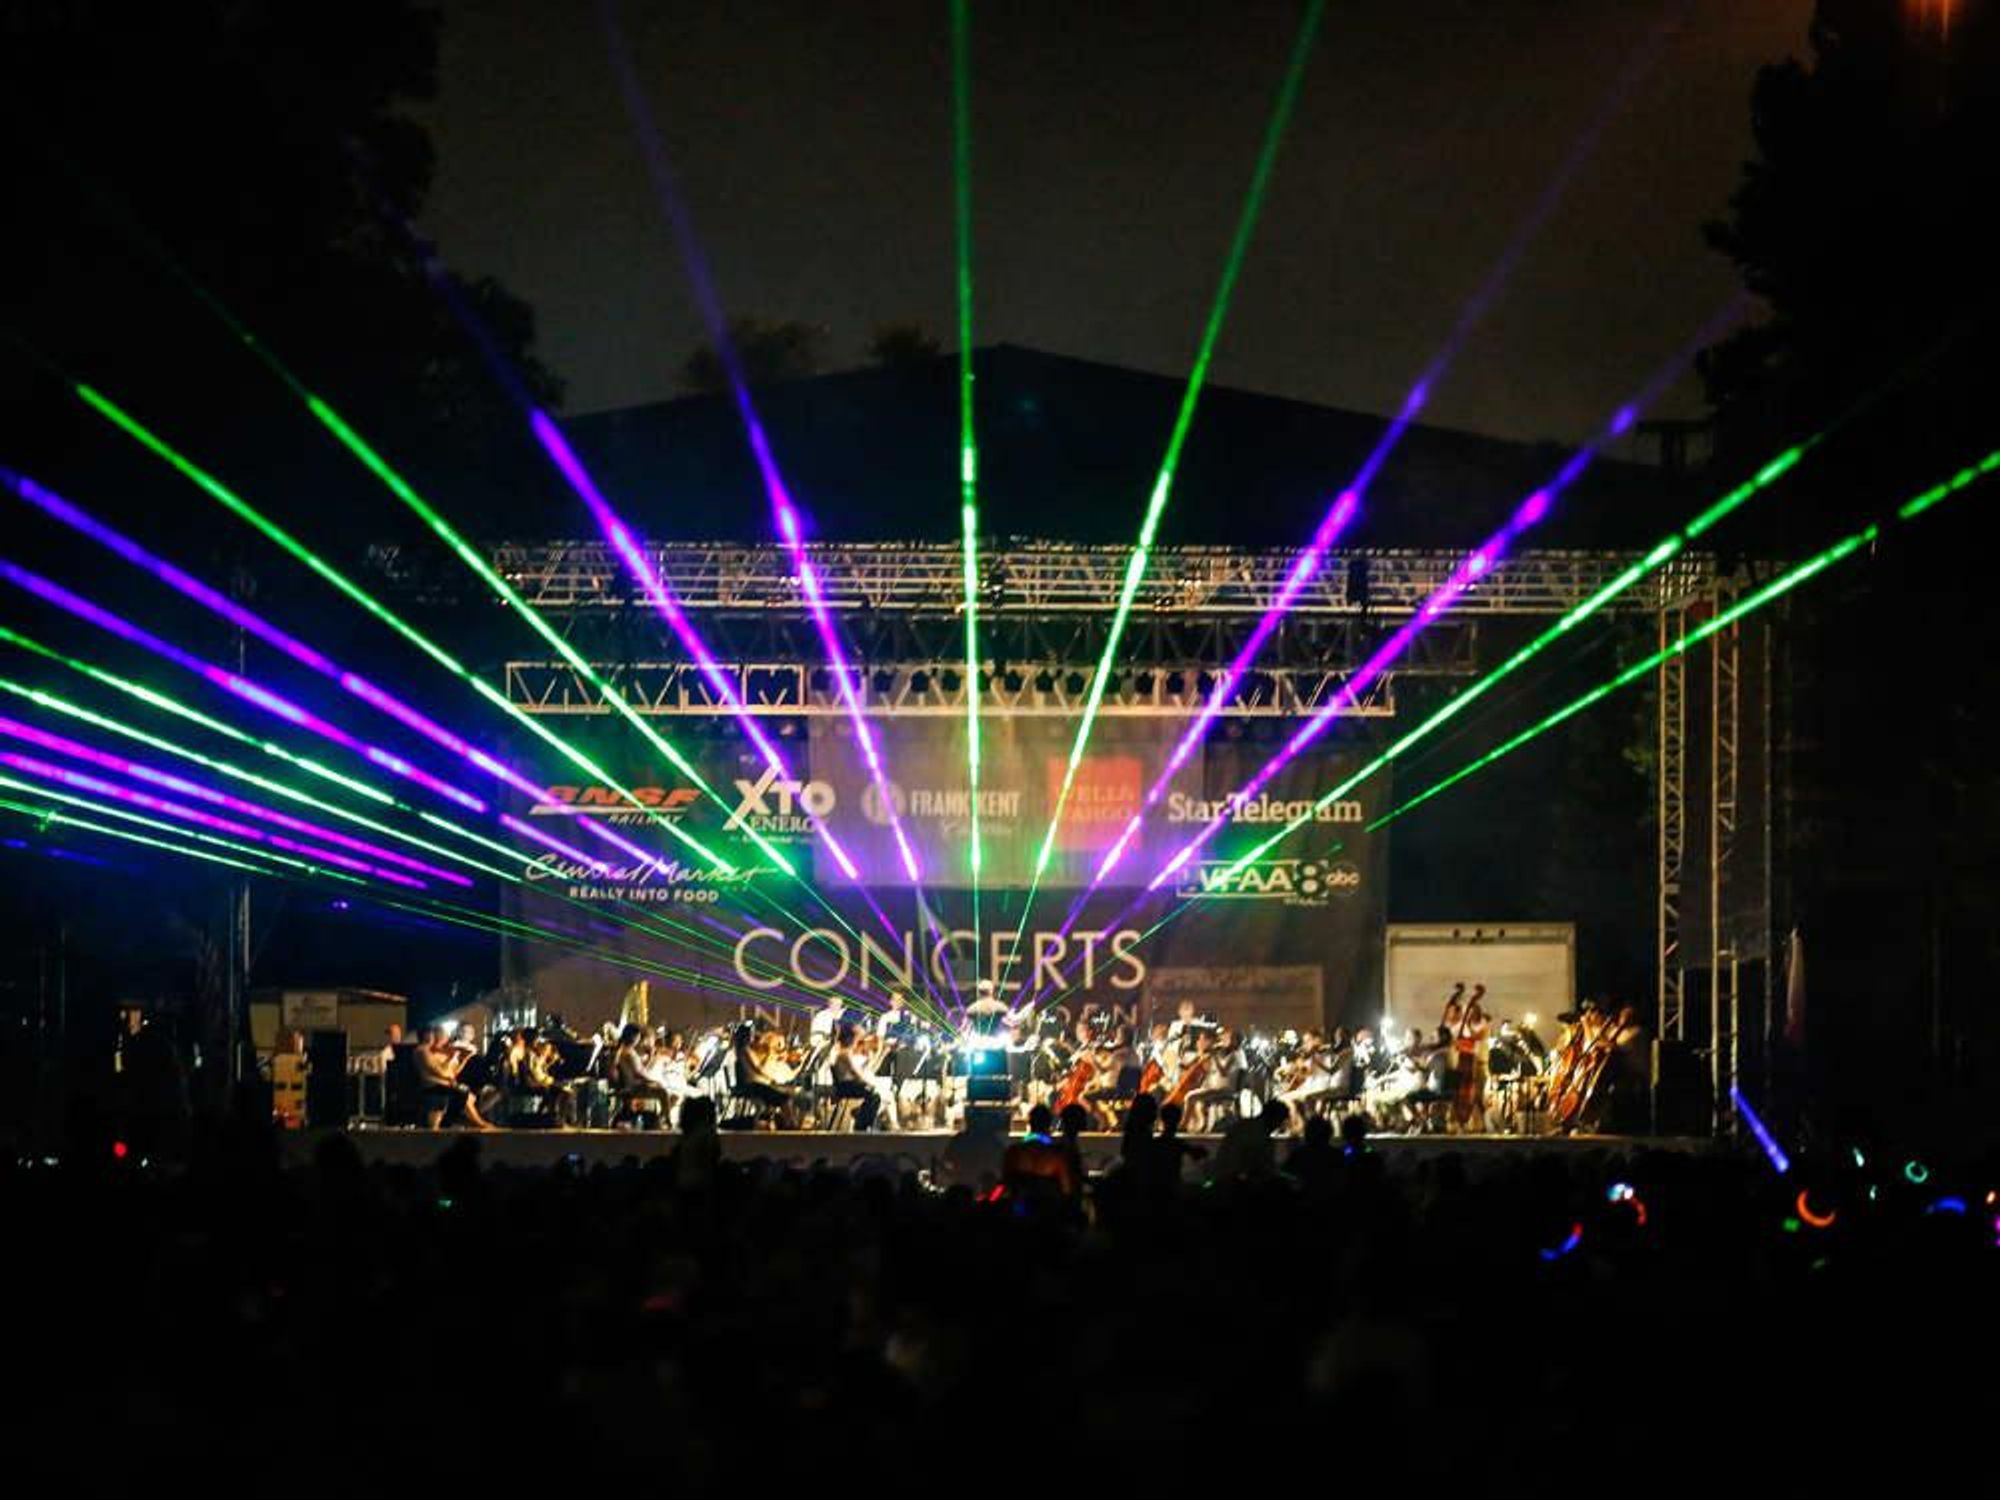 Fort Worth Symphony Orchestra Concerts in the Garden: A Laser Light Spectacular